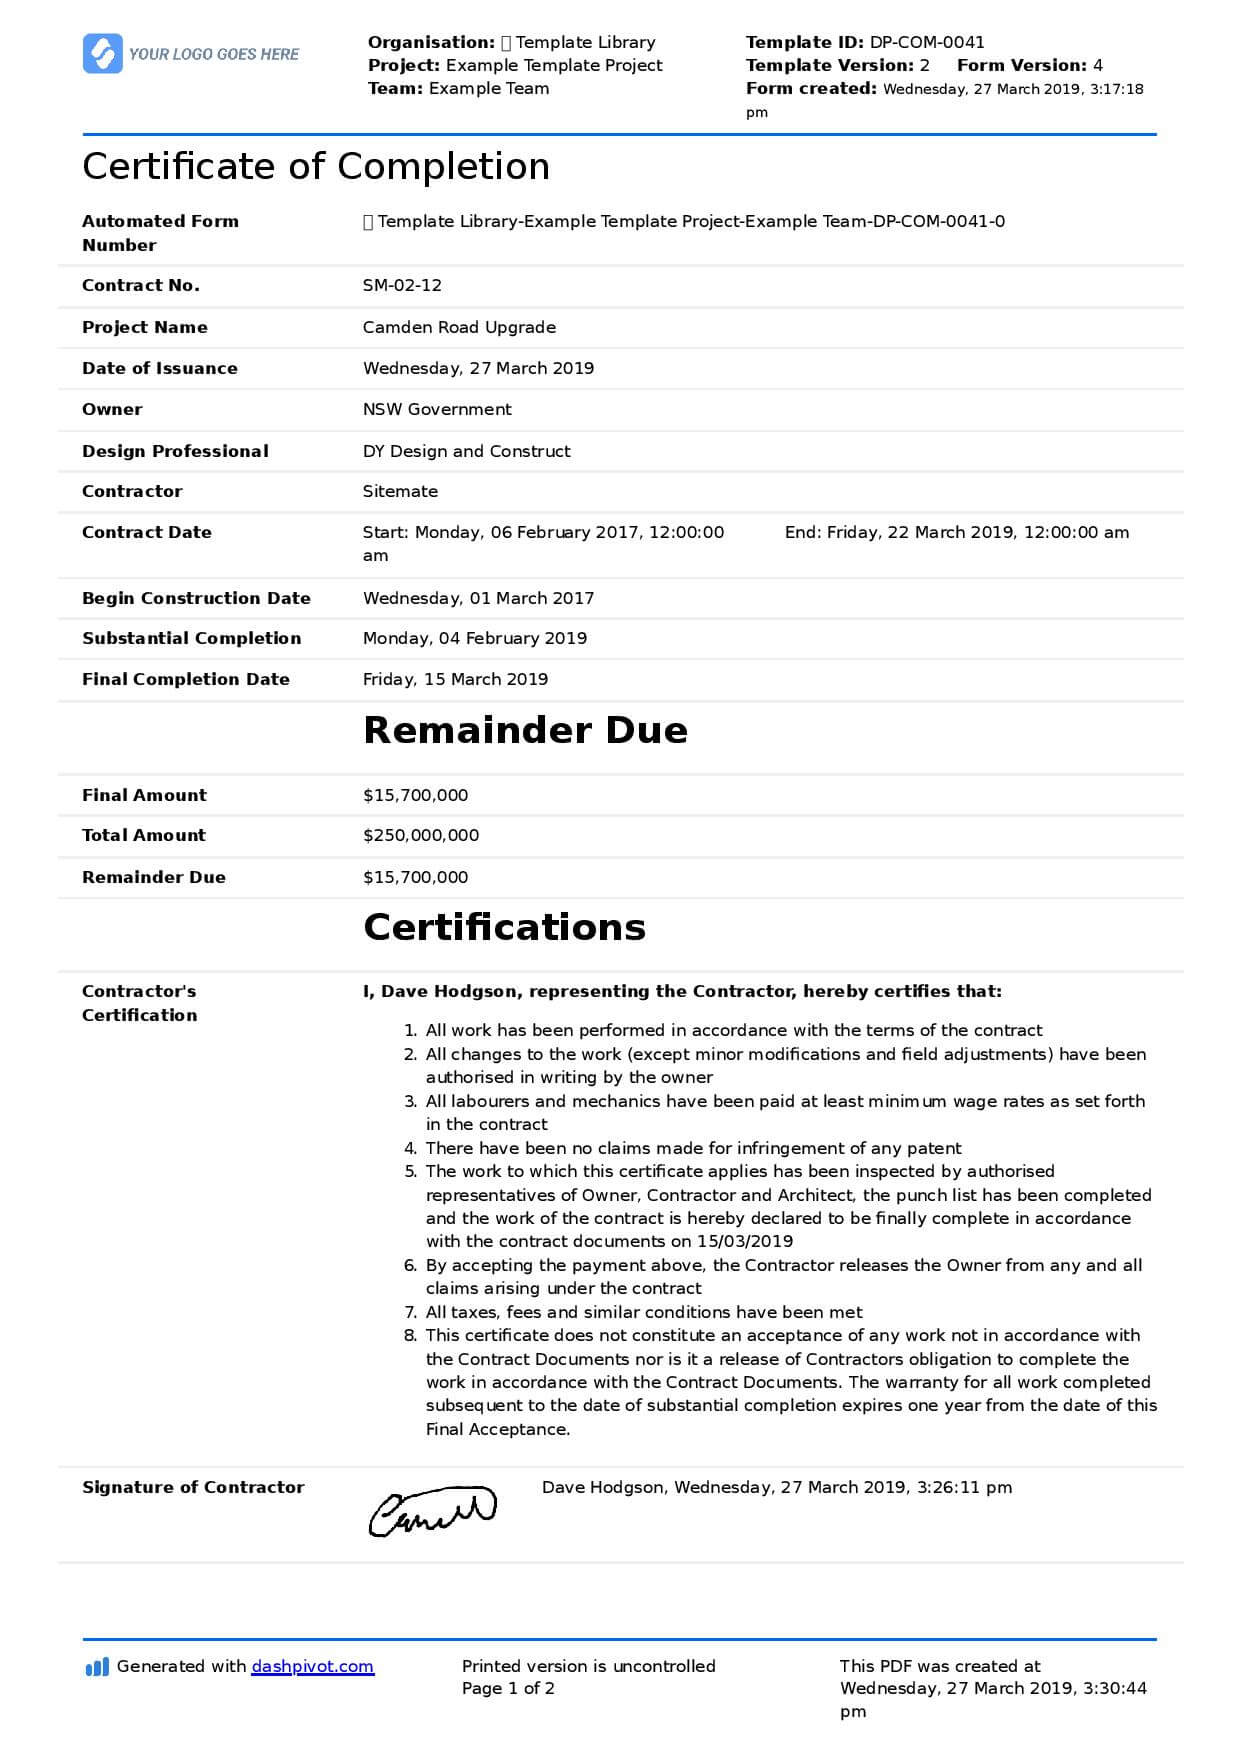 Certificate Of Completion For Construction (Free Template + With Certificate Of Completion Construction Templates